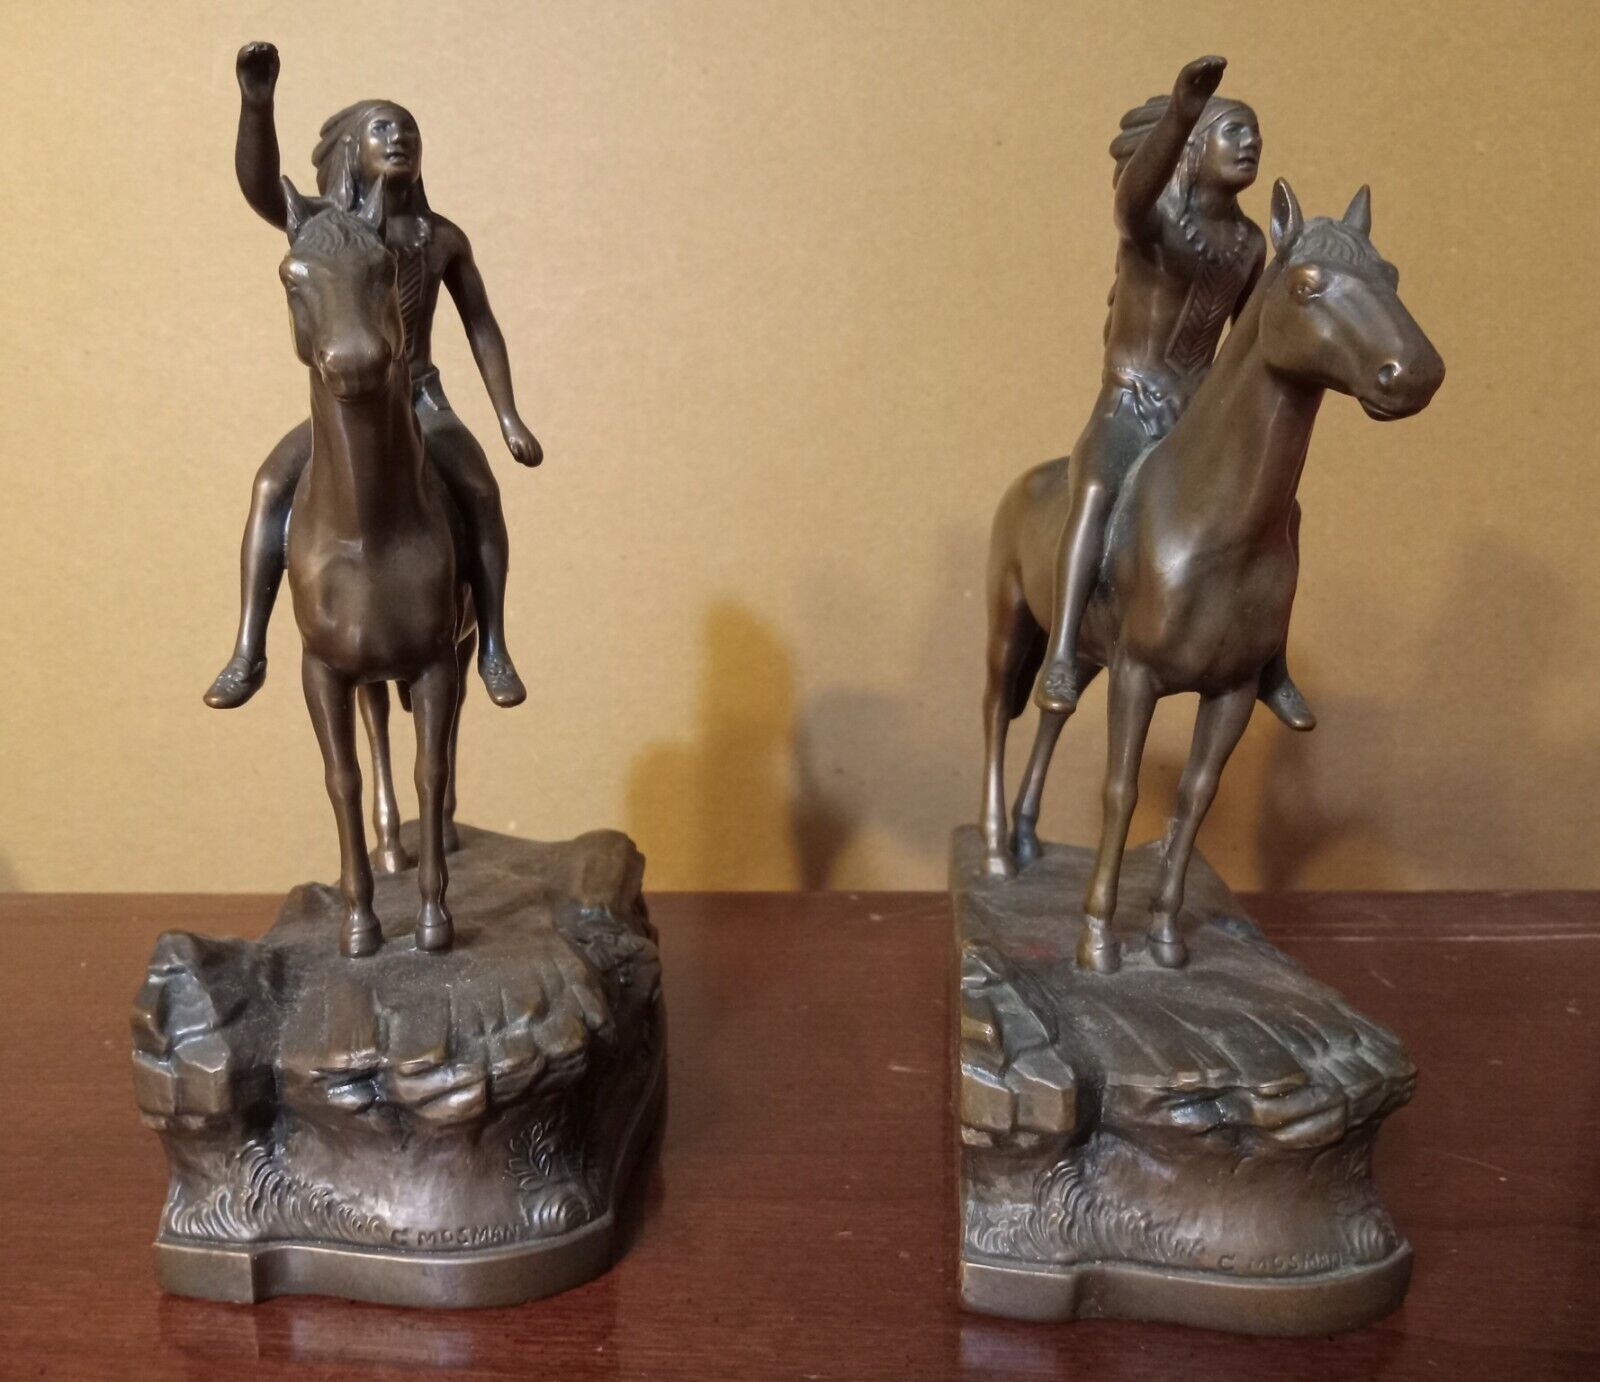 Antique 1927 Jennings Brothers American Indians on horses bookends